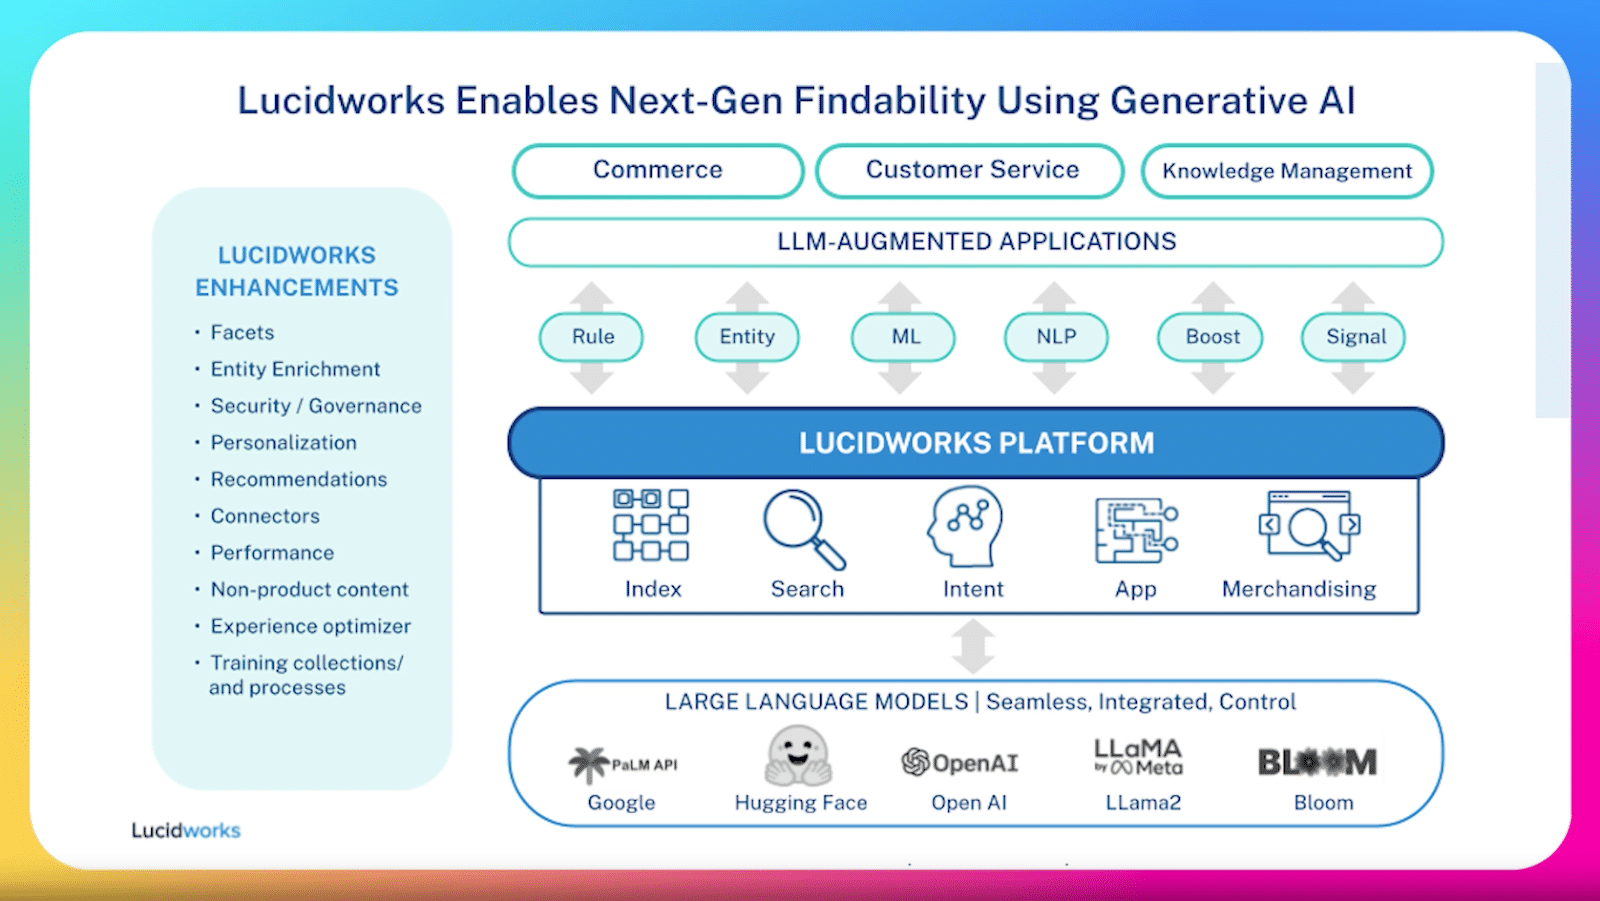 The image is a diagram that illustrates how Lucidworks enables next-generation findability using generative AI. It shows that the Lucidworks platform sits at the center of the solution, connecting to large language models (LLMs) like PALM, OpenAI, LLaMA, and Bloom. The platform also includes several enhancements for generative AI, such as entity enrichment, security/governance, personalization, and recommendations. These enhancements are then used to power LLM-augmented applications in commerce, customer service, and knowledge management. The diagram also shows the different components of the Lucidworks platform, such as the index, search, intent, app, and merchandising components. 